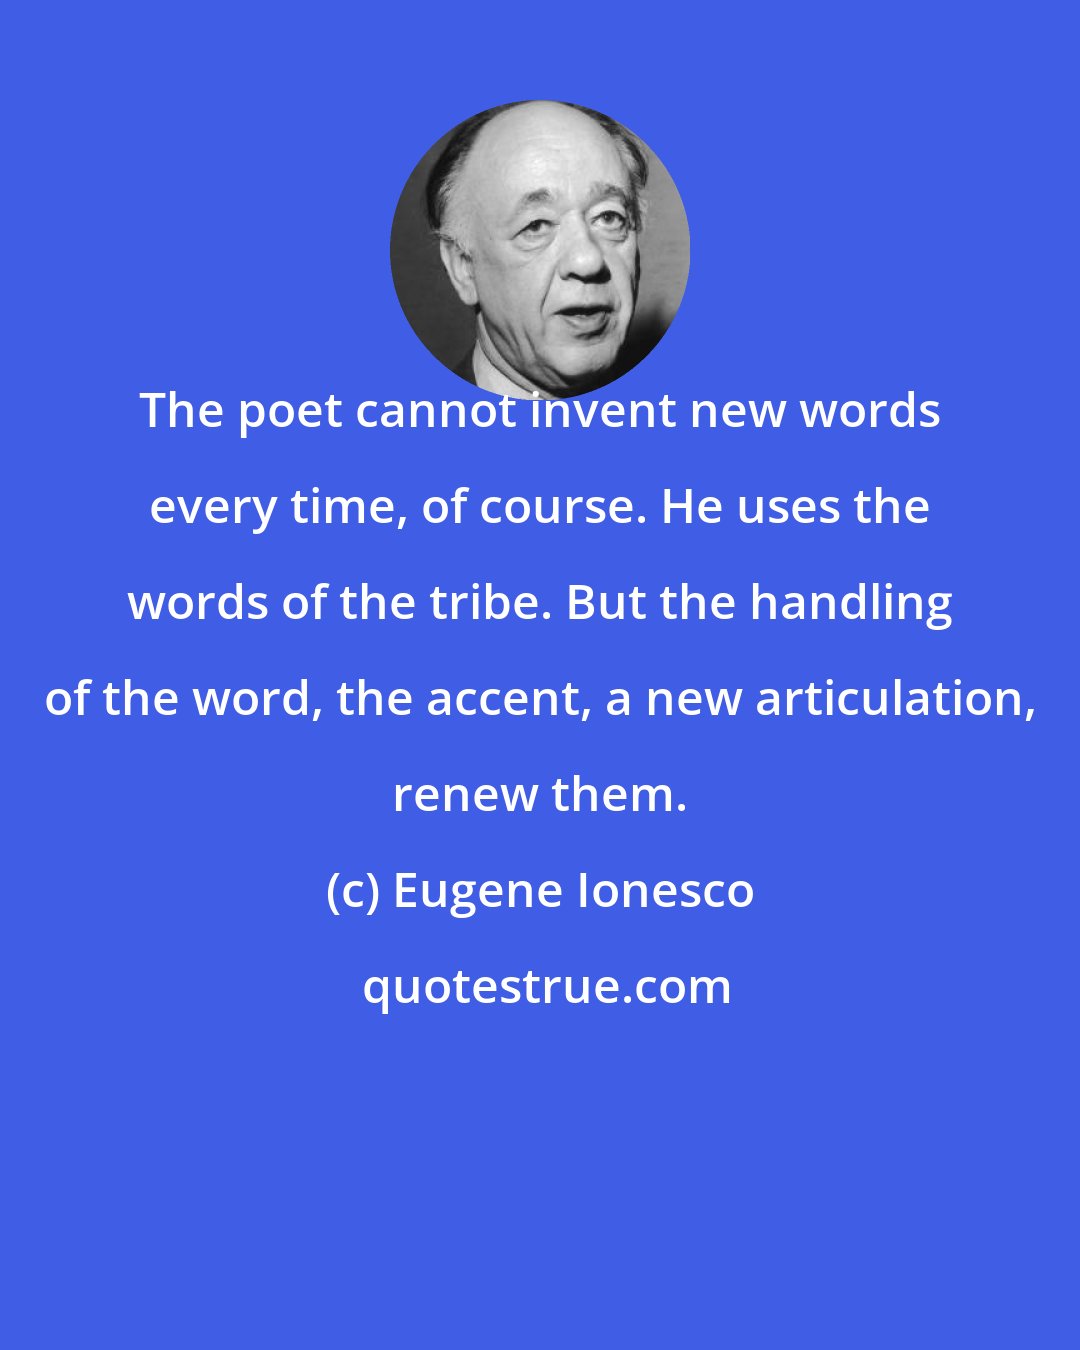 Eugene Ionesco: The poet cannot invent new words every time, of course. He uses the words of the tribe. But the handling of the word, the accent, a new articulation, renew them.